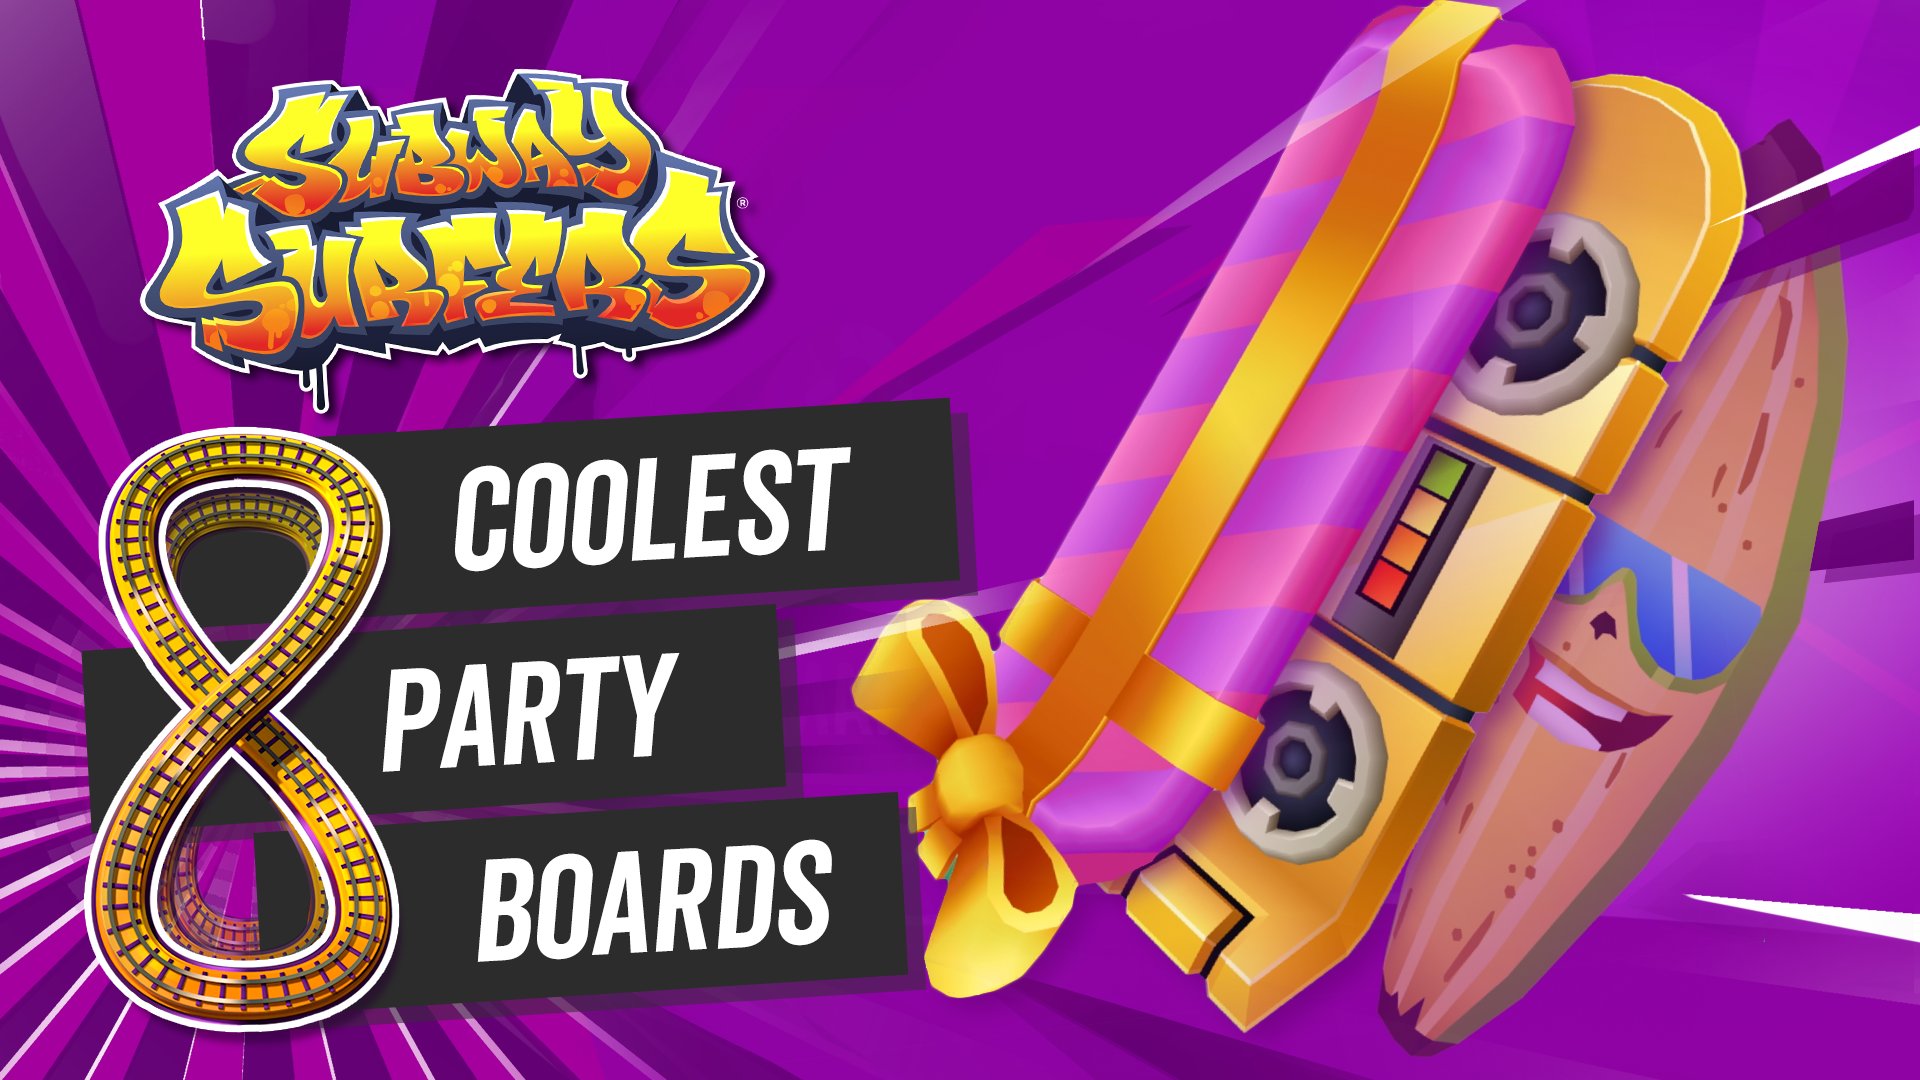 Subway Surfers - It's the party that never ends! 😎 Celebrate the